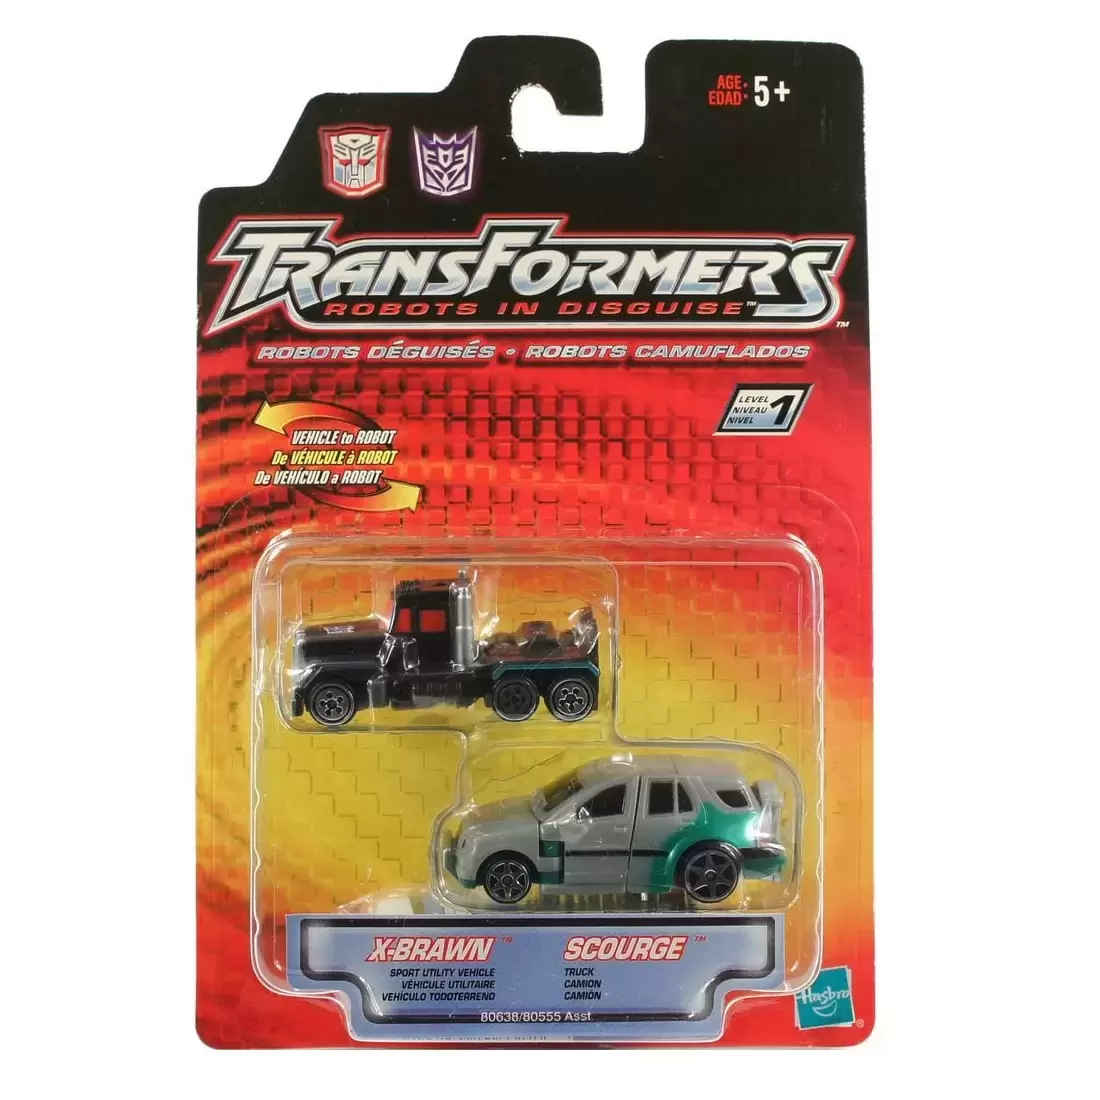 Transformers Robots in Disguise (RID 2001) - Twin Pack: X-Brawn & Scourge (Spychangers)